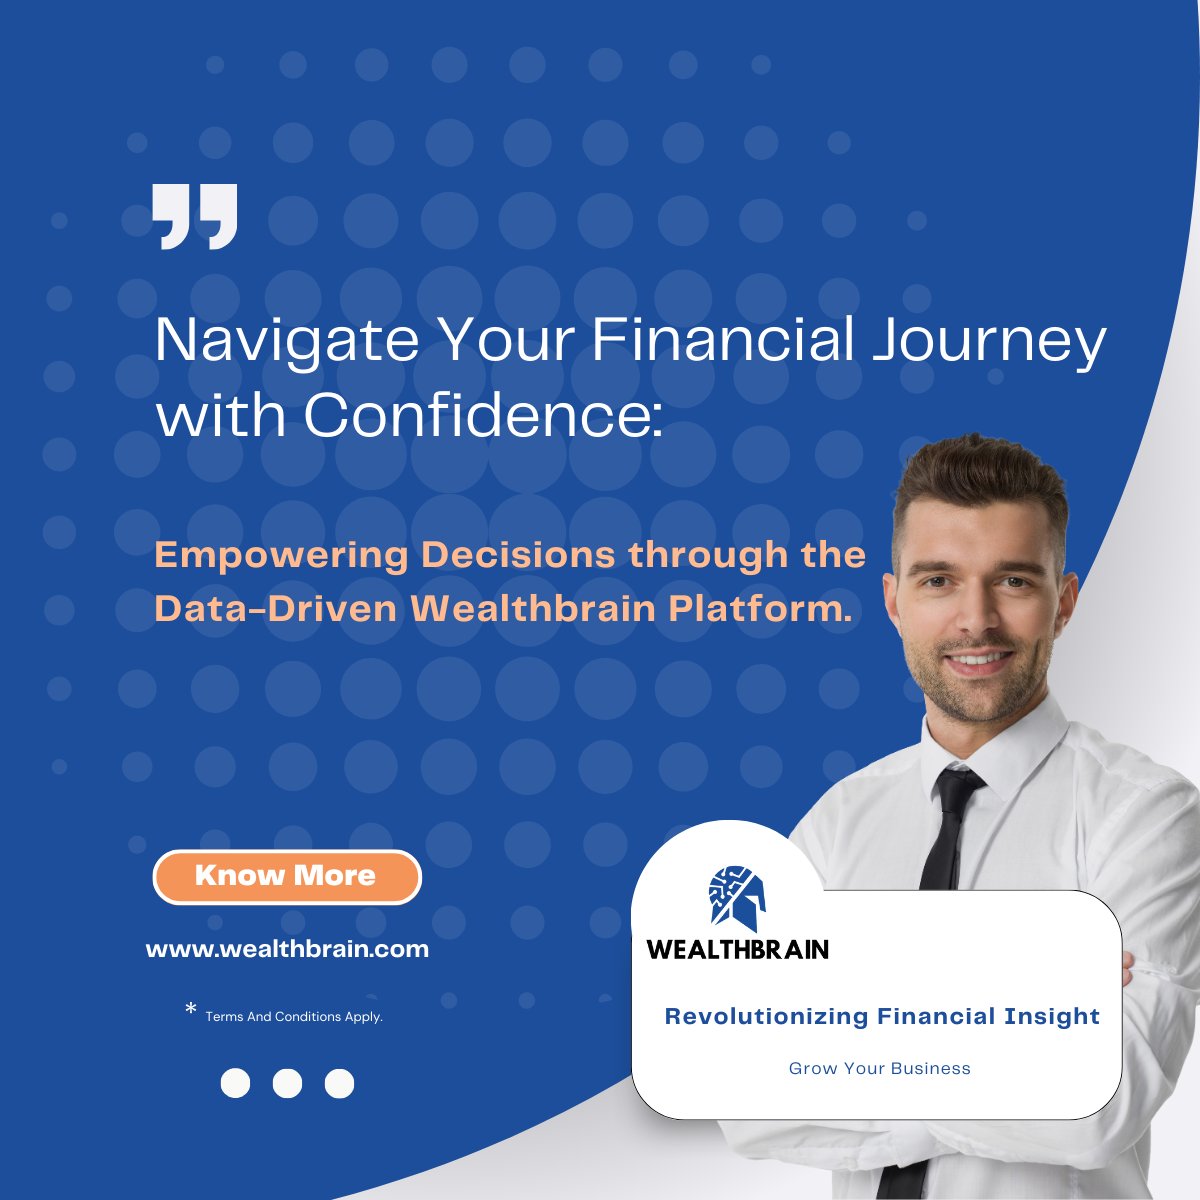 'Embark on Your Financial Journey with Confidence: Empower Informed Decisions through the Insightful WealthBrain Platform.'

#FinancialEmpowerment #DataDrivenInsights #InformedDecisions #StrategicEmpowerment #Wealthbrain